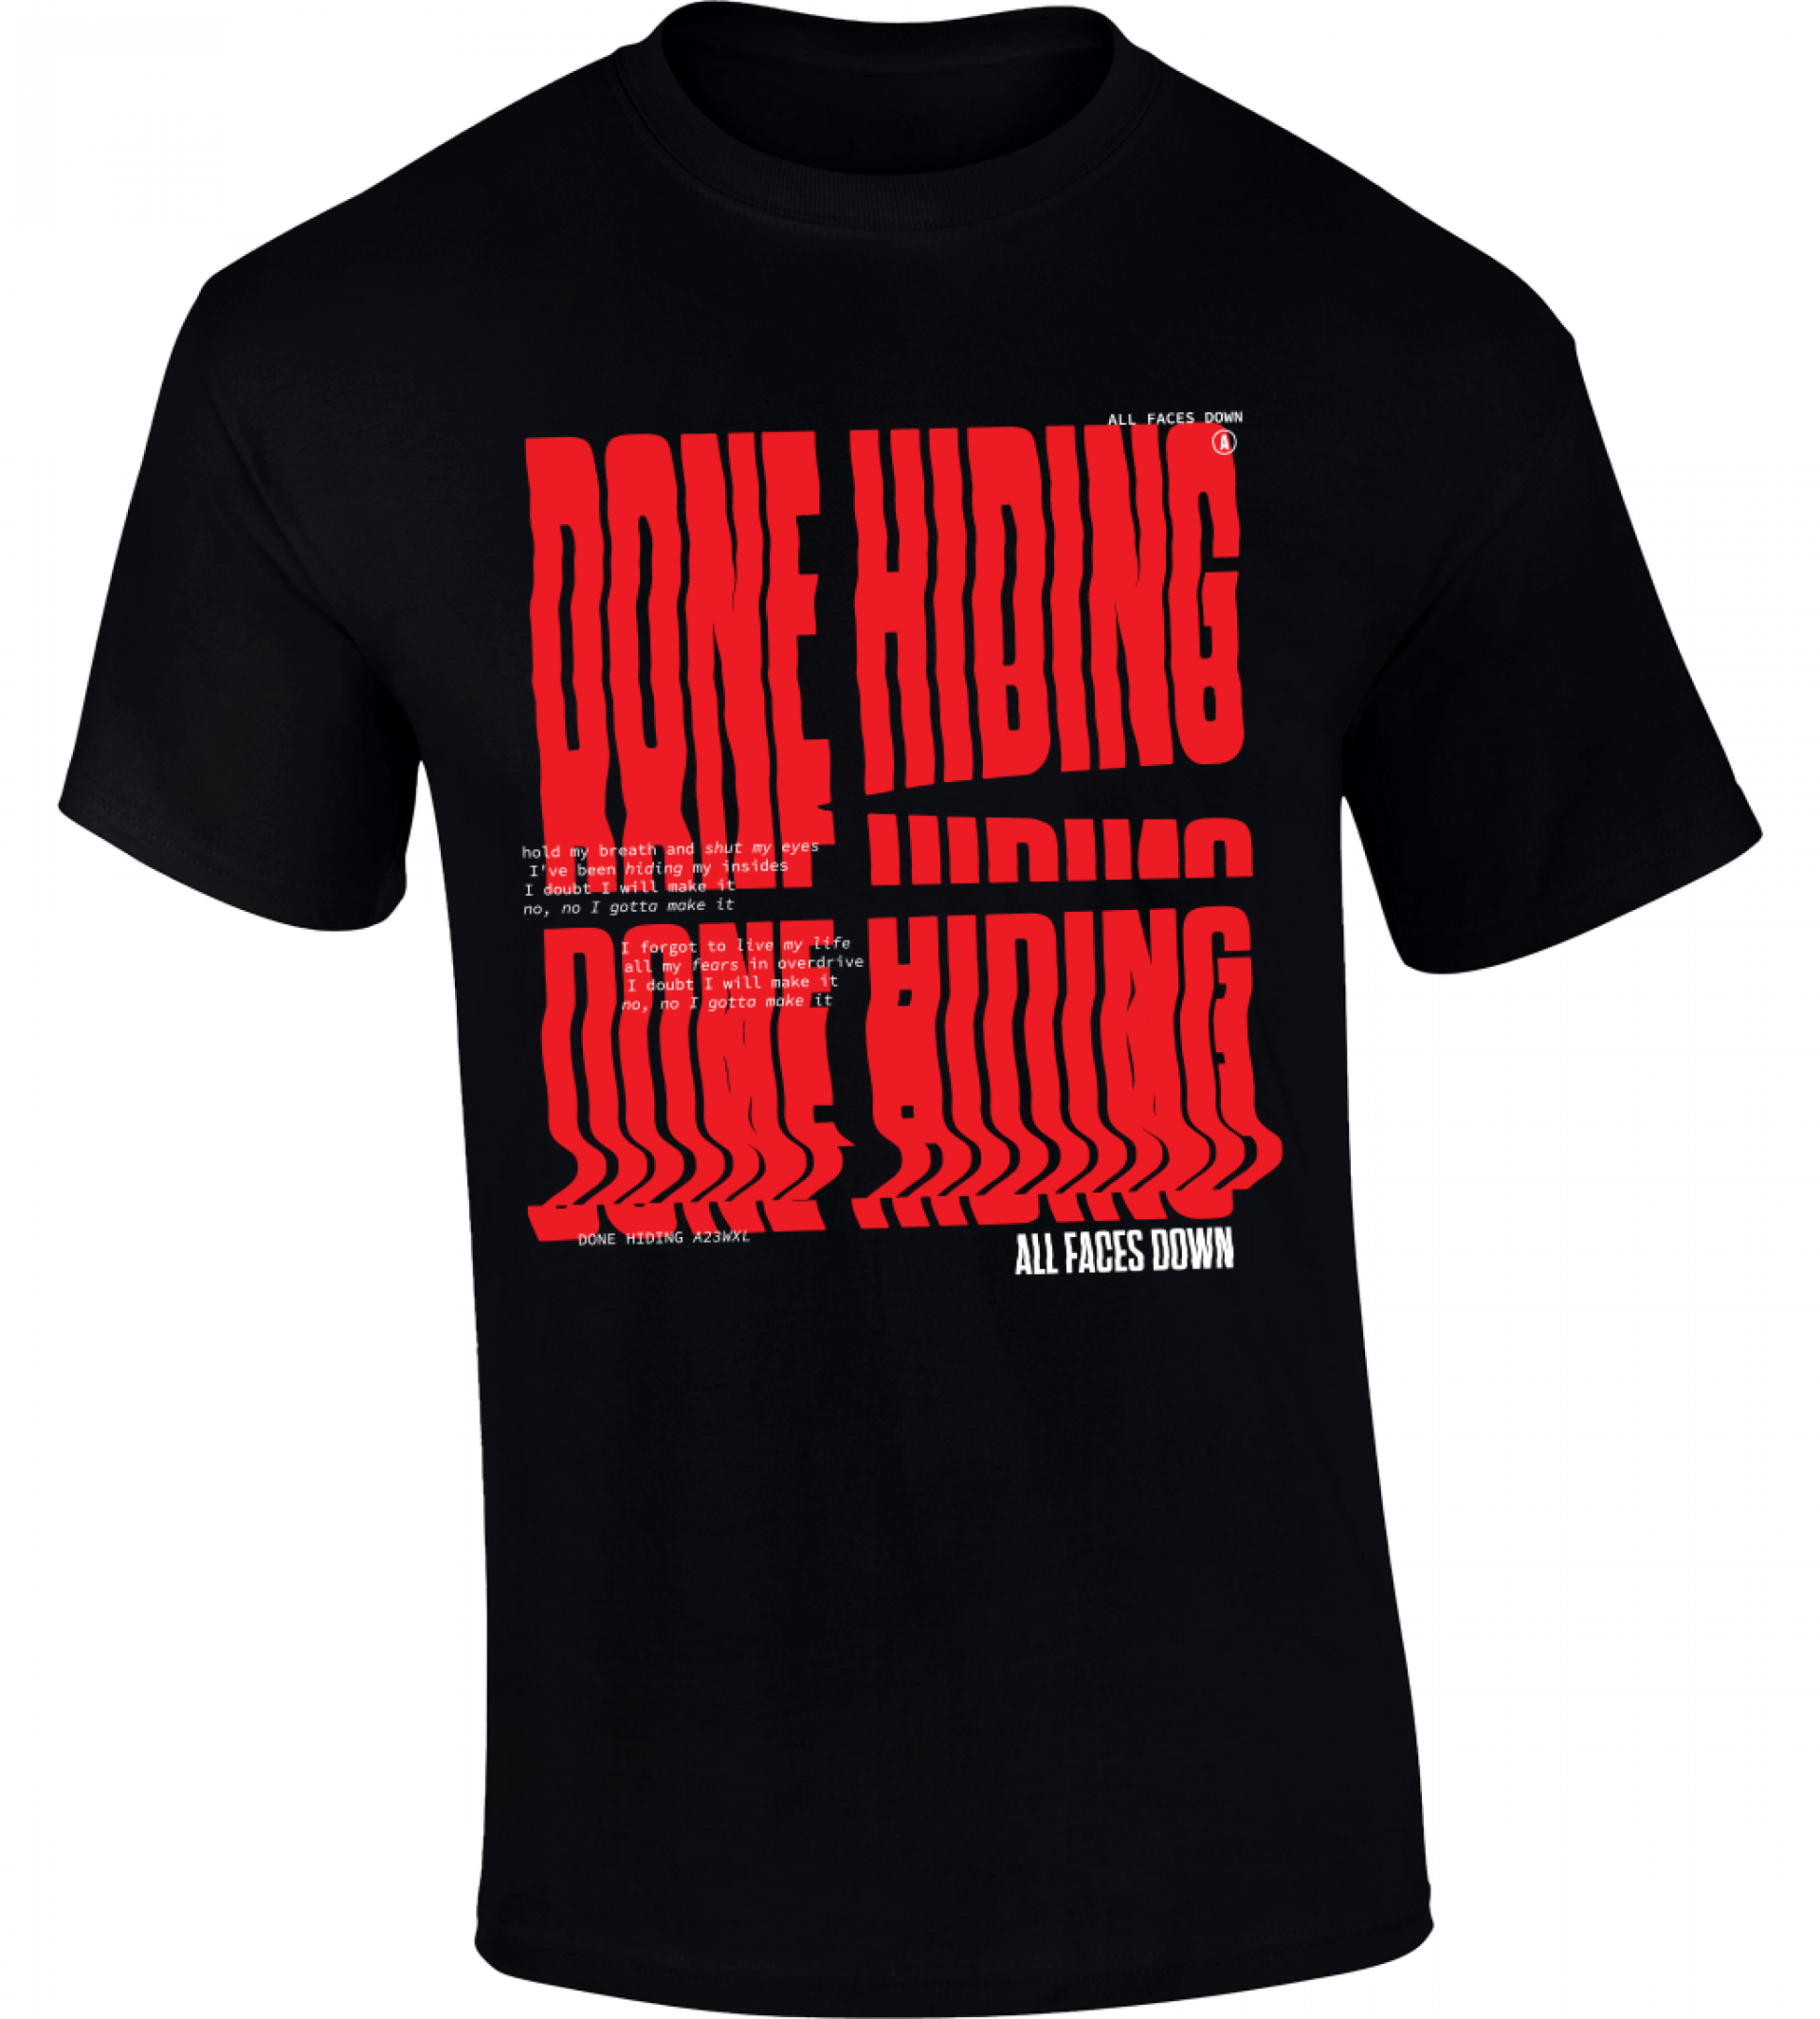 "Done Hiding" - Tshirt, All Faces Down Offical Merchandise